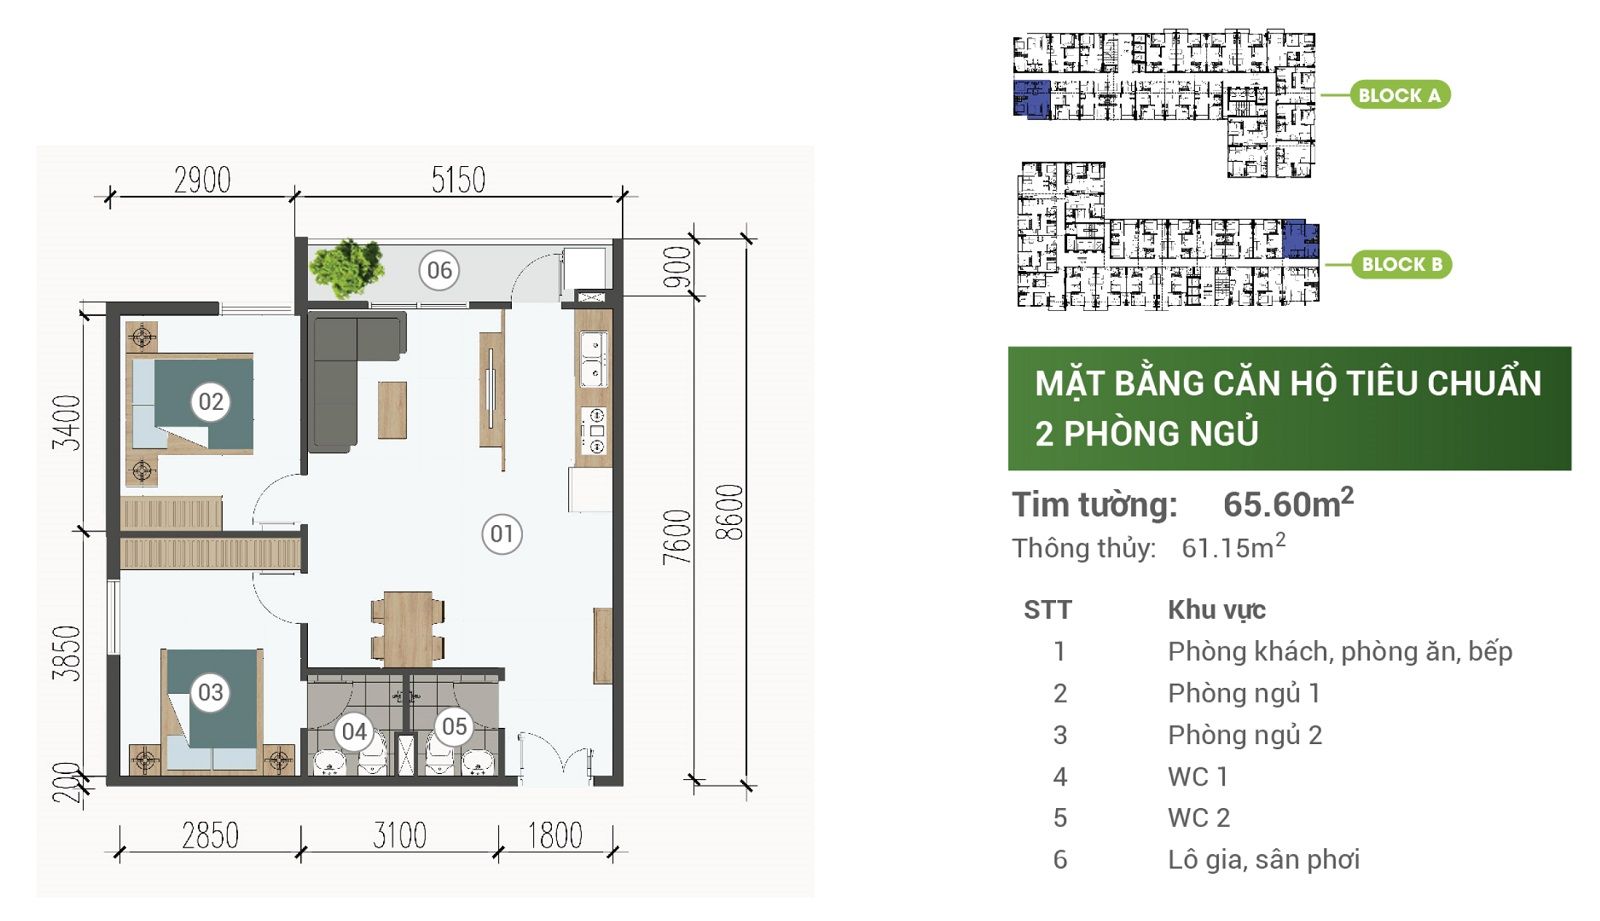 Park View Binh Duong 3-bedroom apartment layout